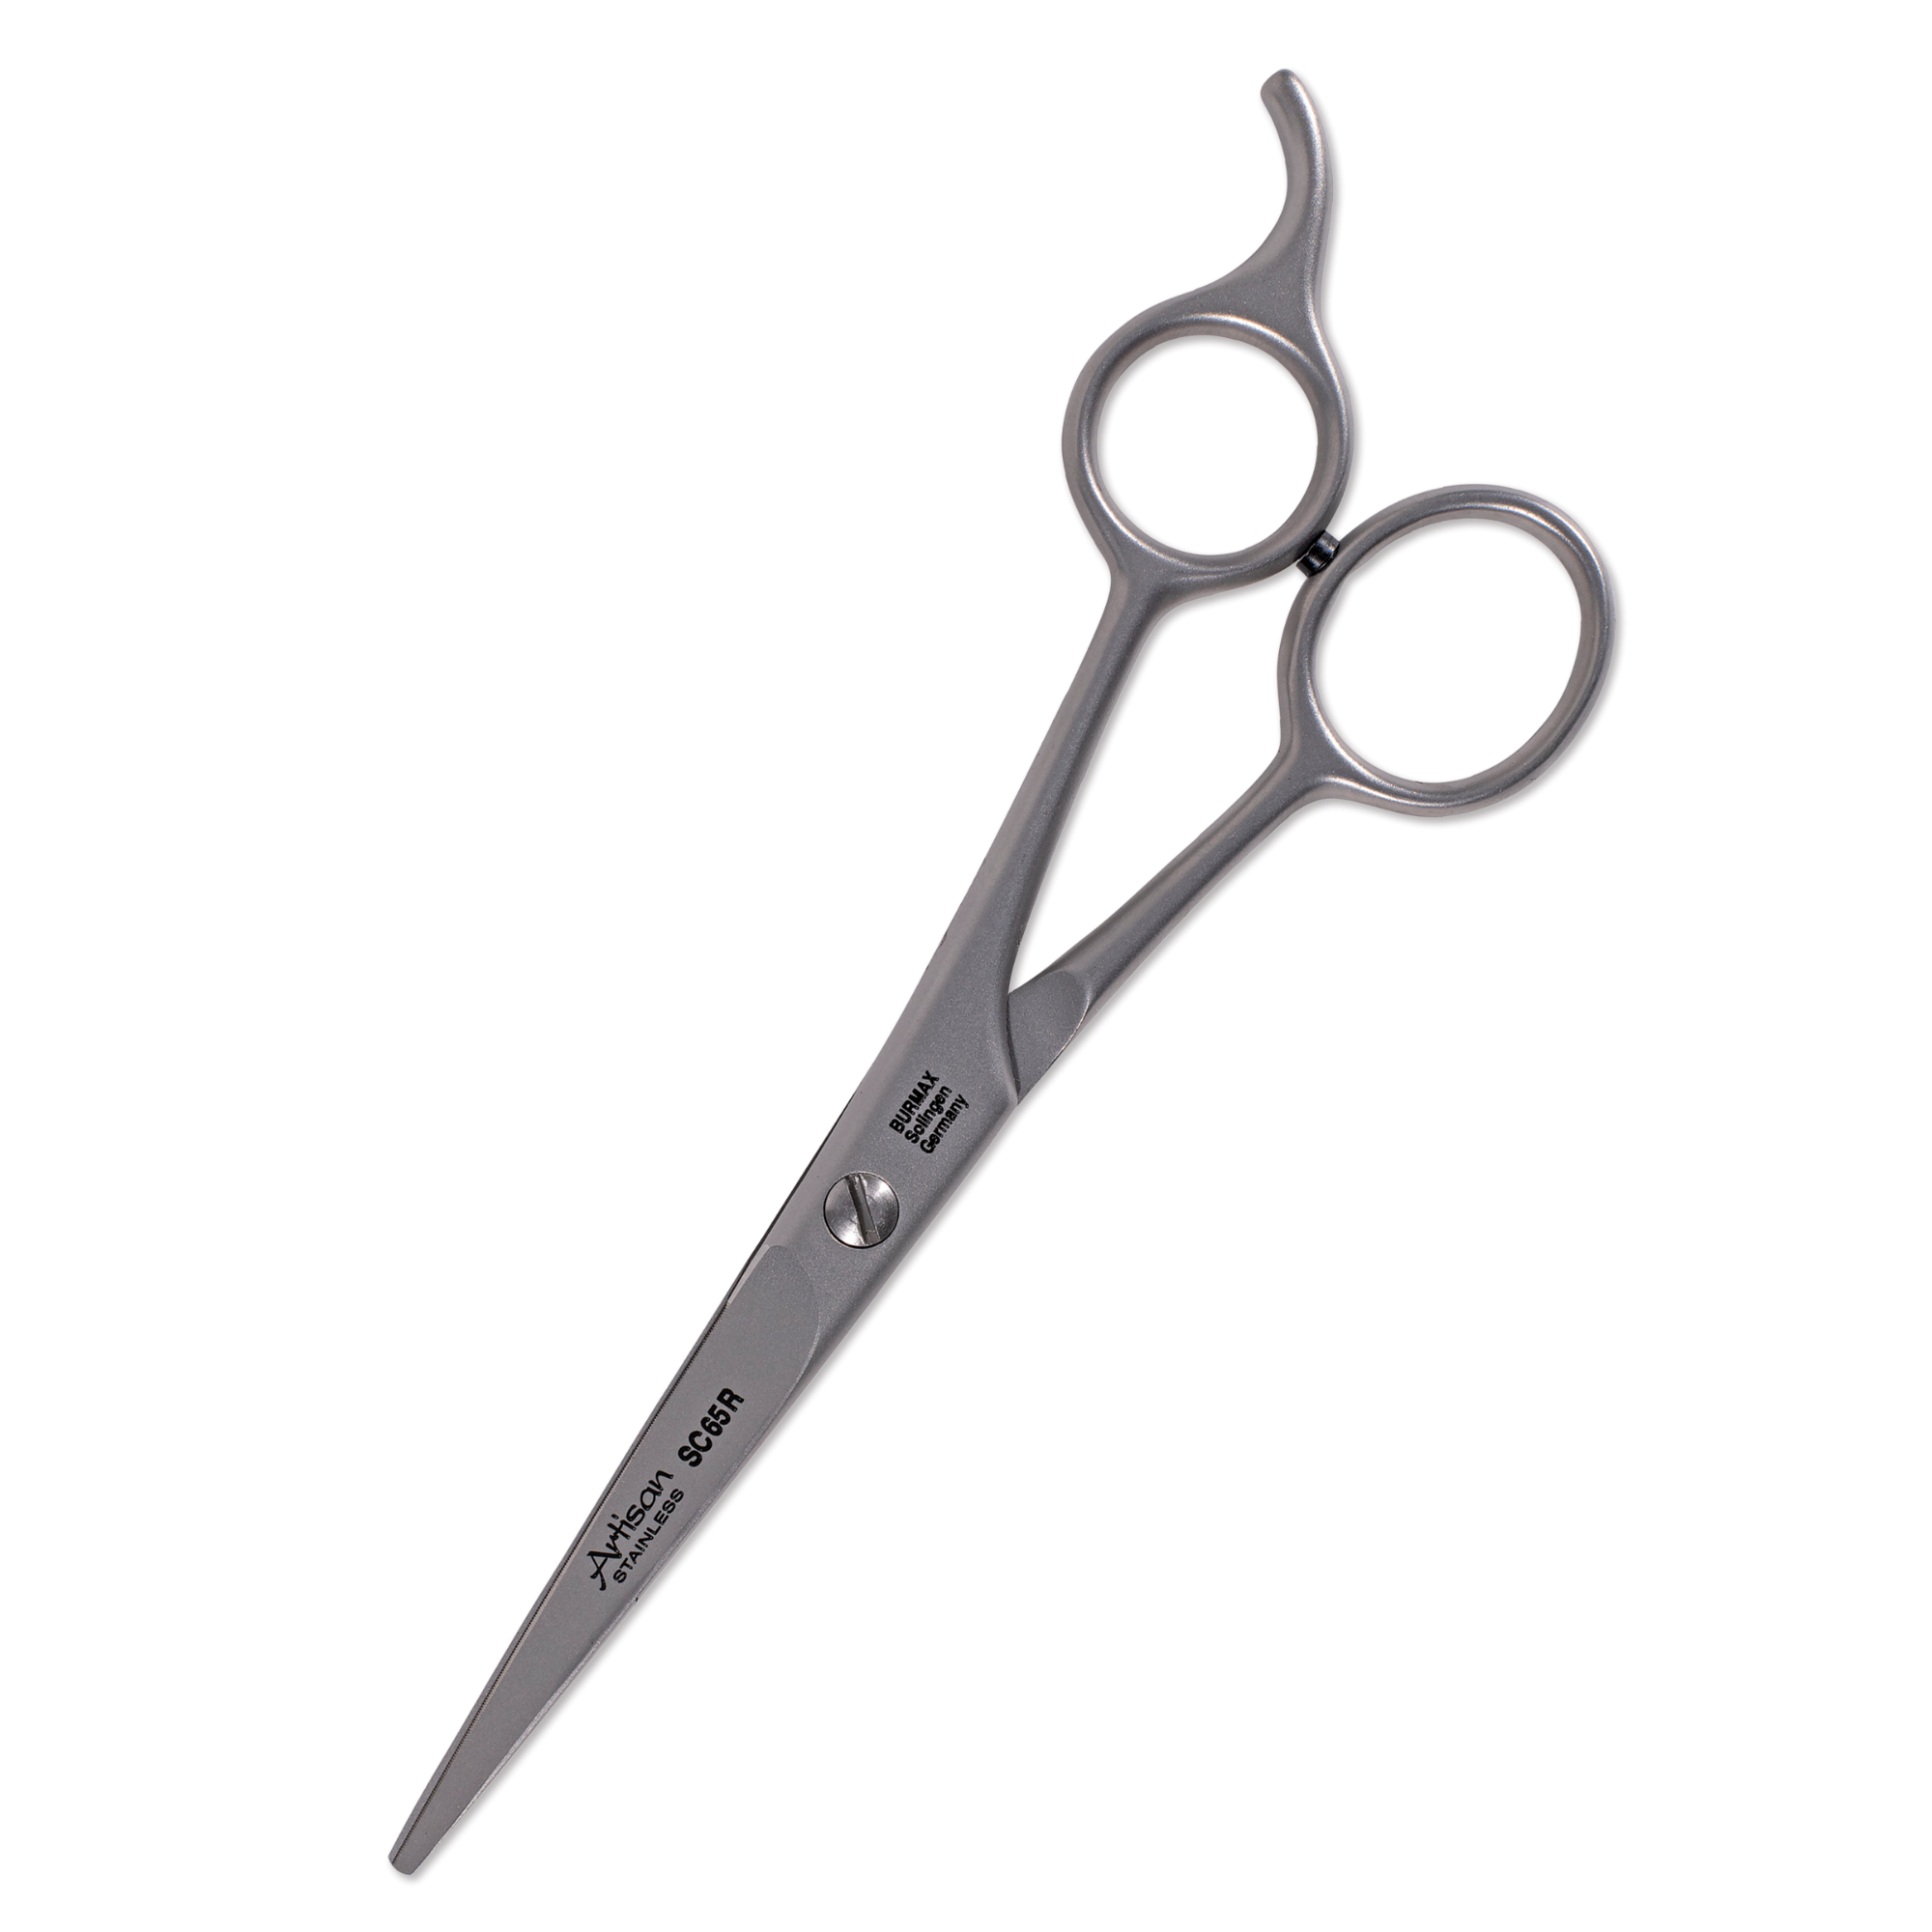 6-1/2" Stainless Steel Shear with Finger-Rest